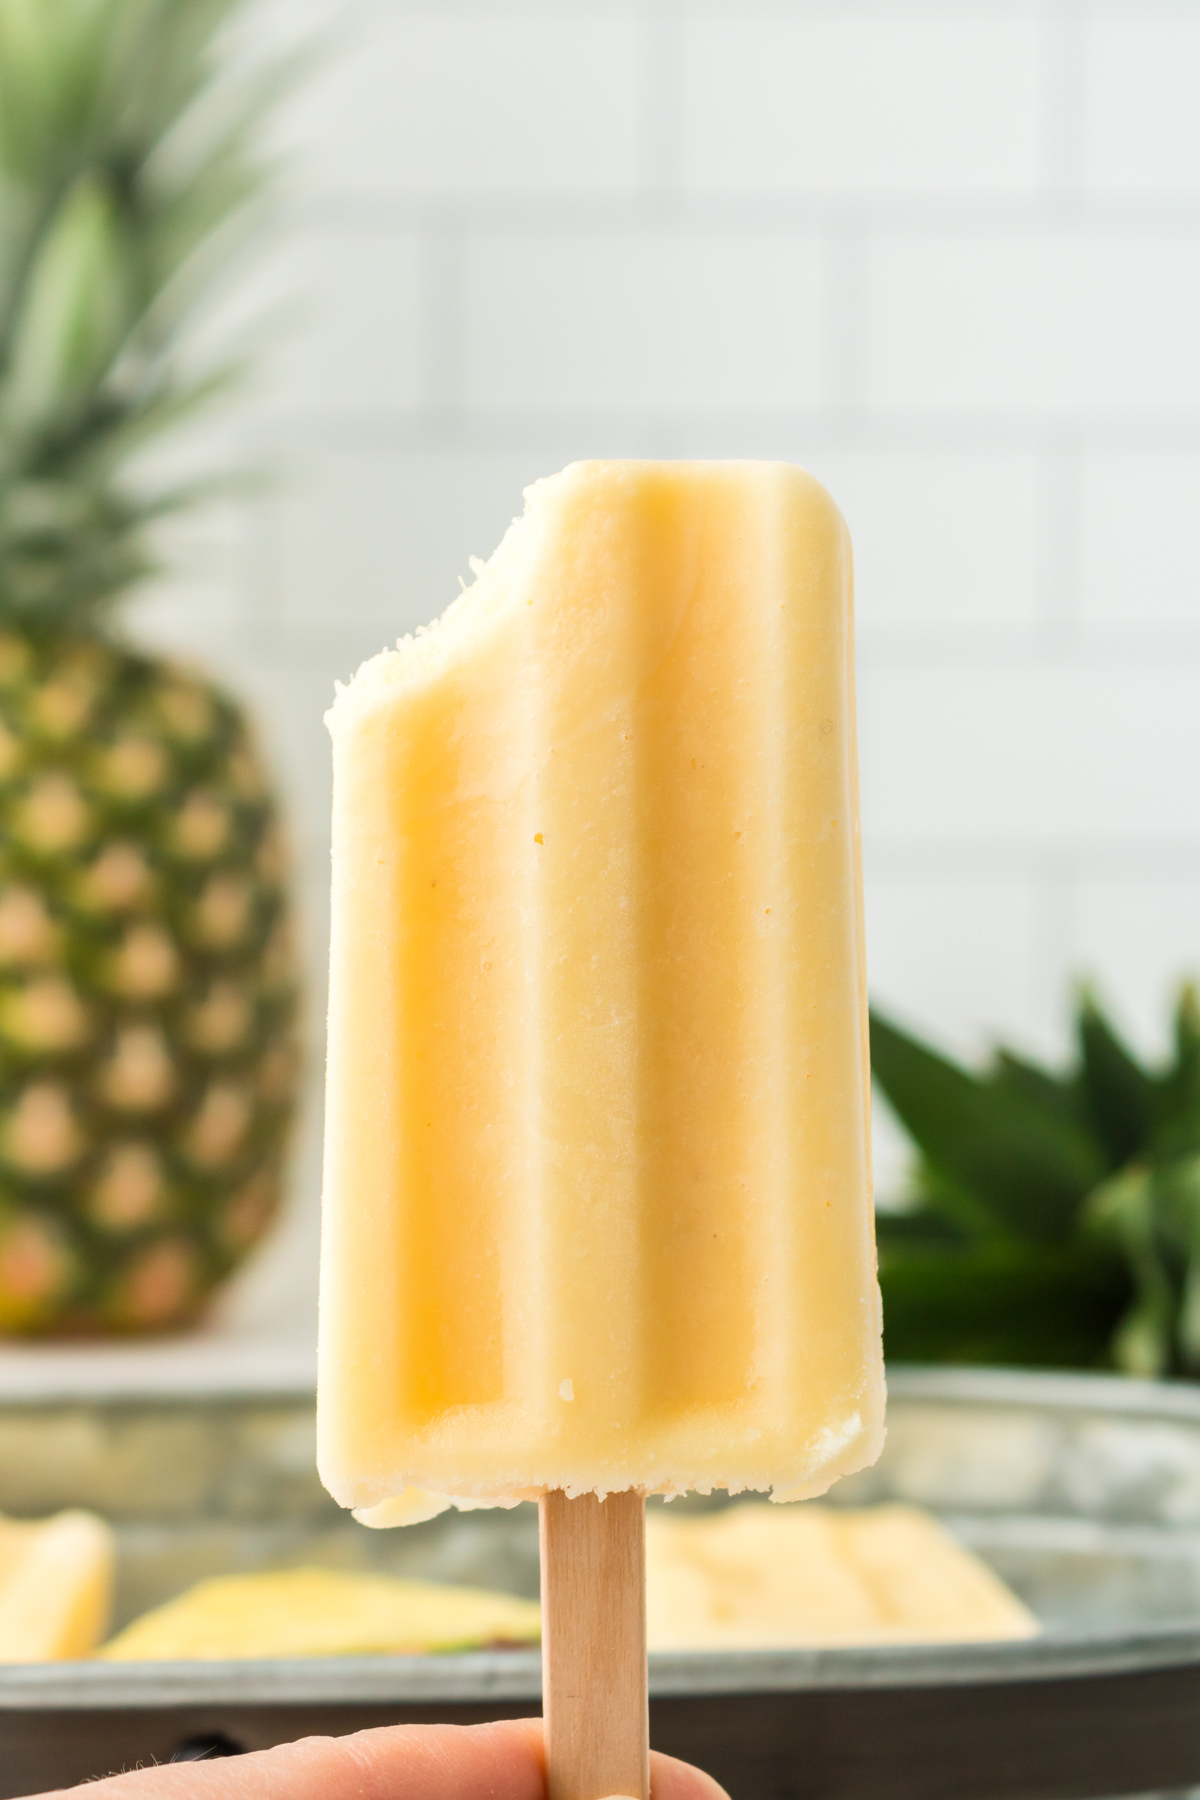 dole whip popsicle with a bite taken out of it